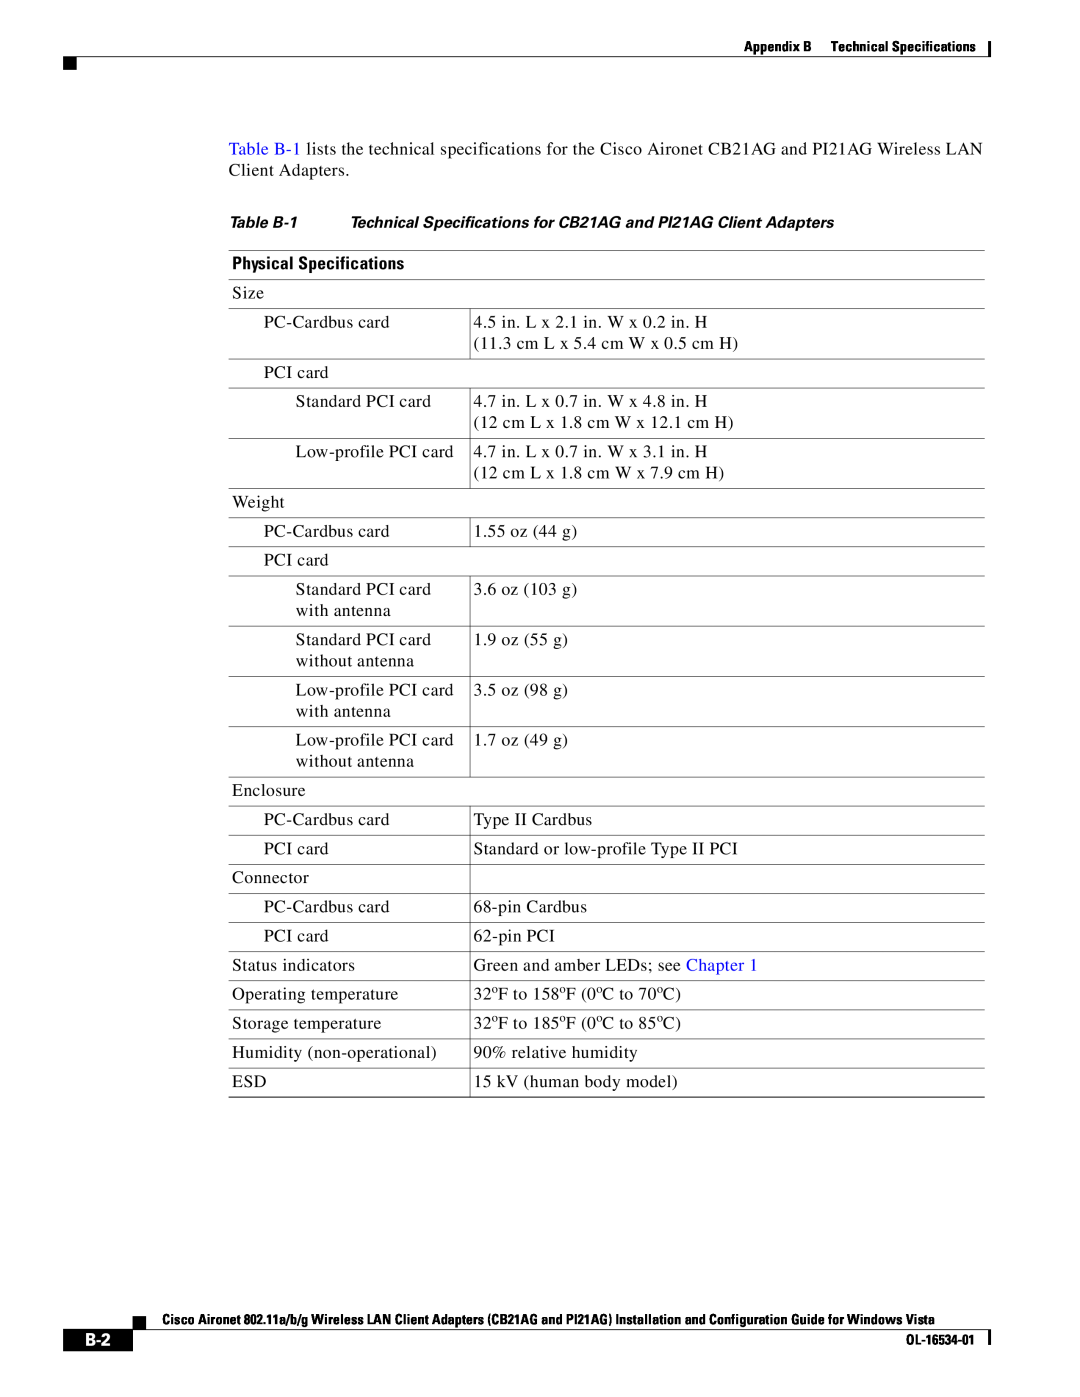 Cisco Systems PI21AG, CB21AG manual Physical Specifications 